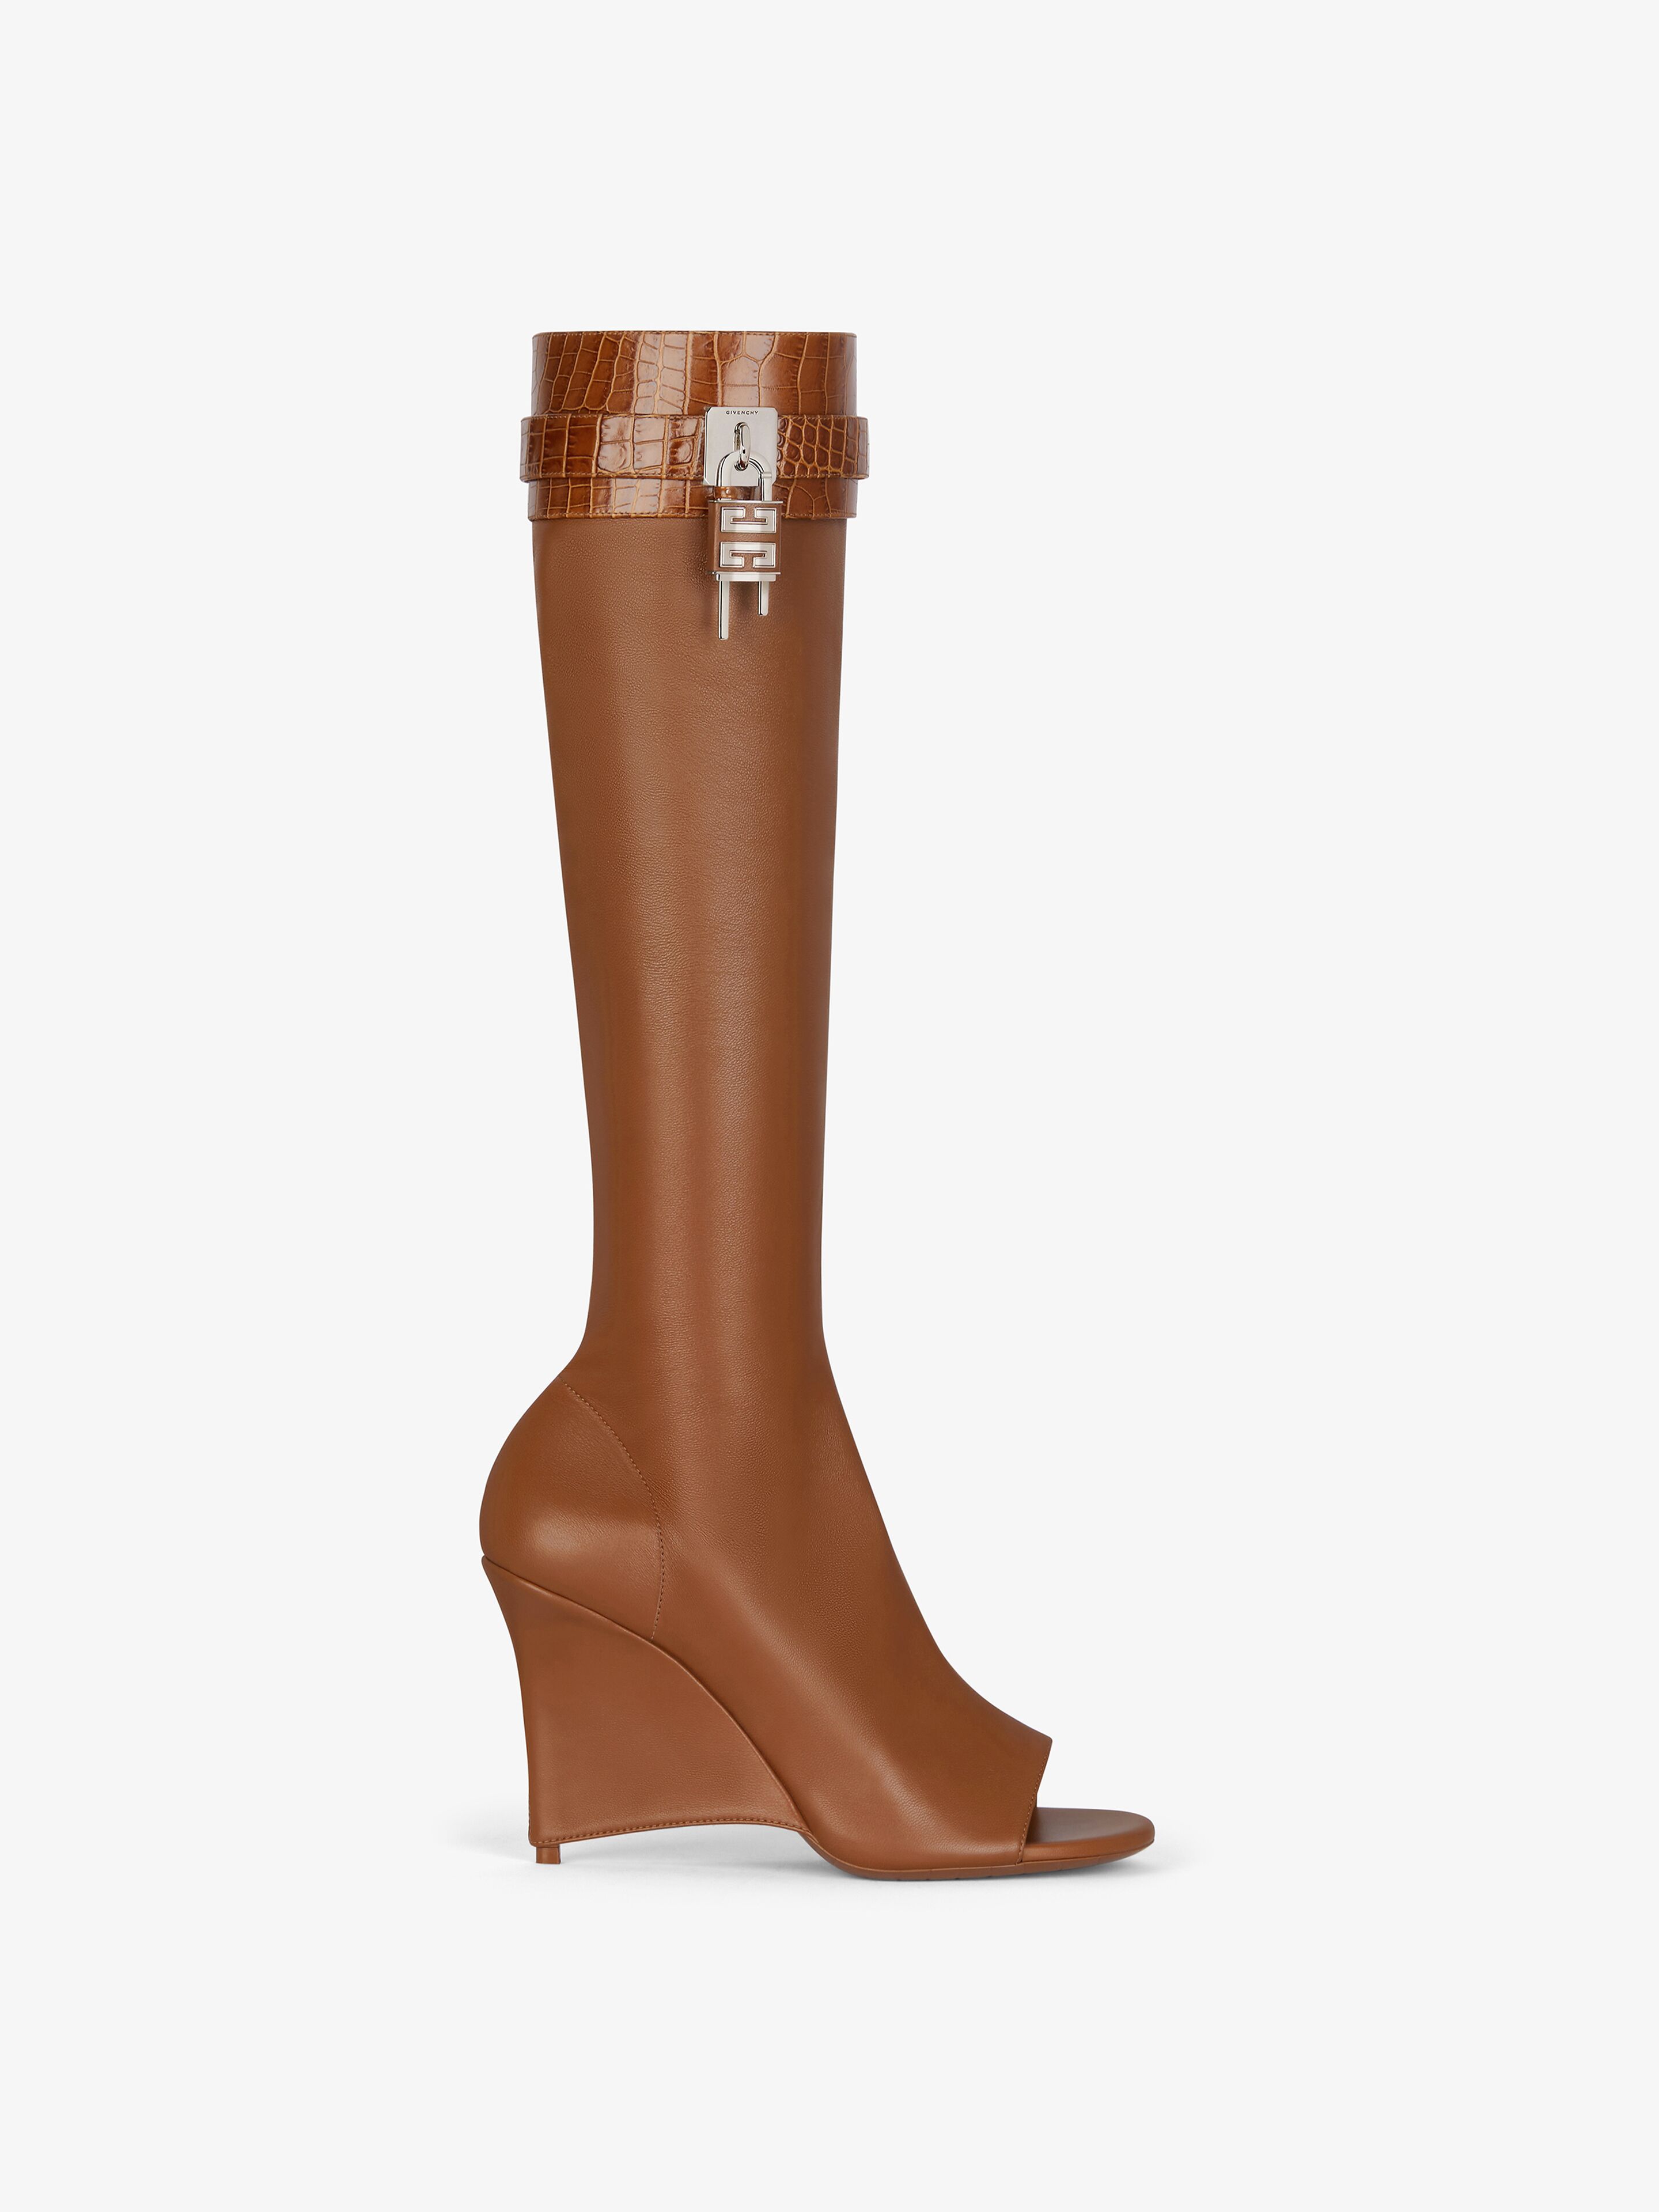 Givenchy Shark Lock Stiletto Sandal Boots In Leather In Brown